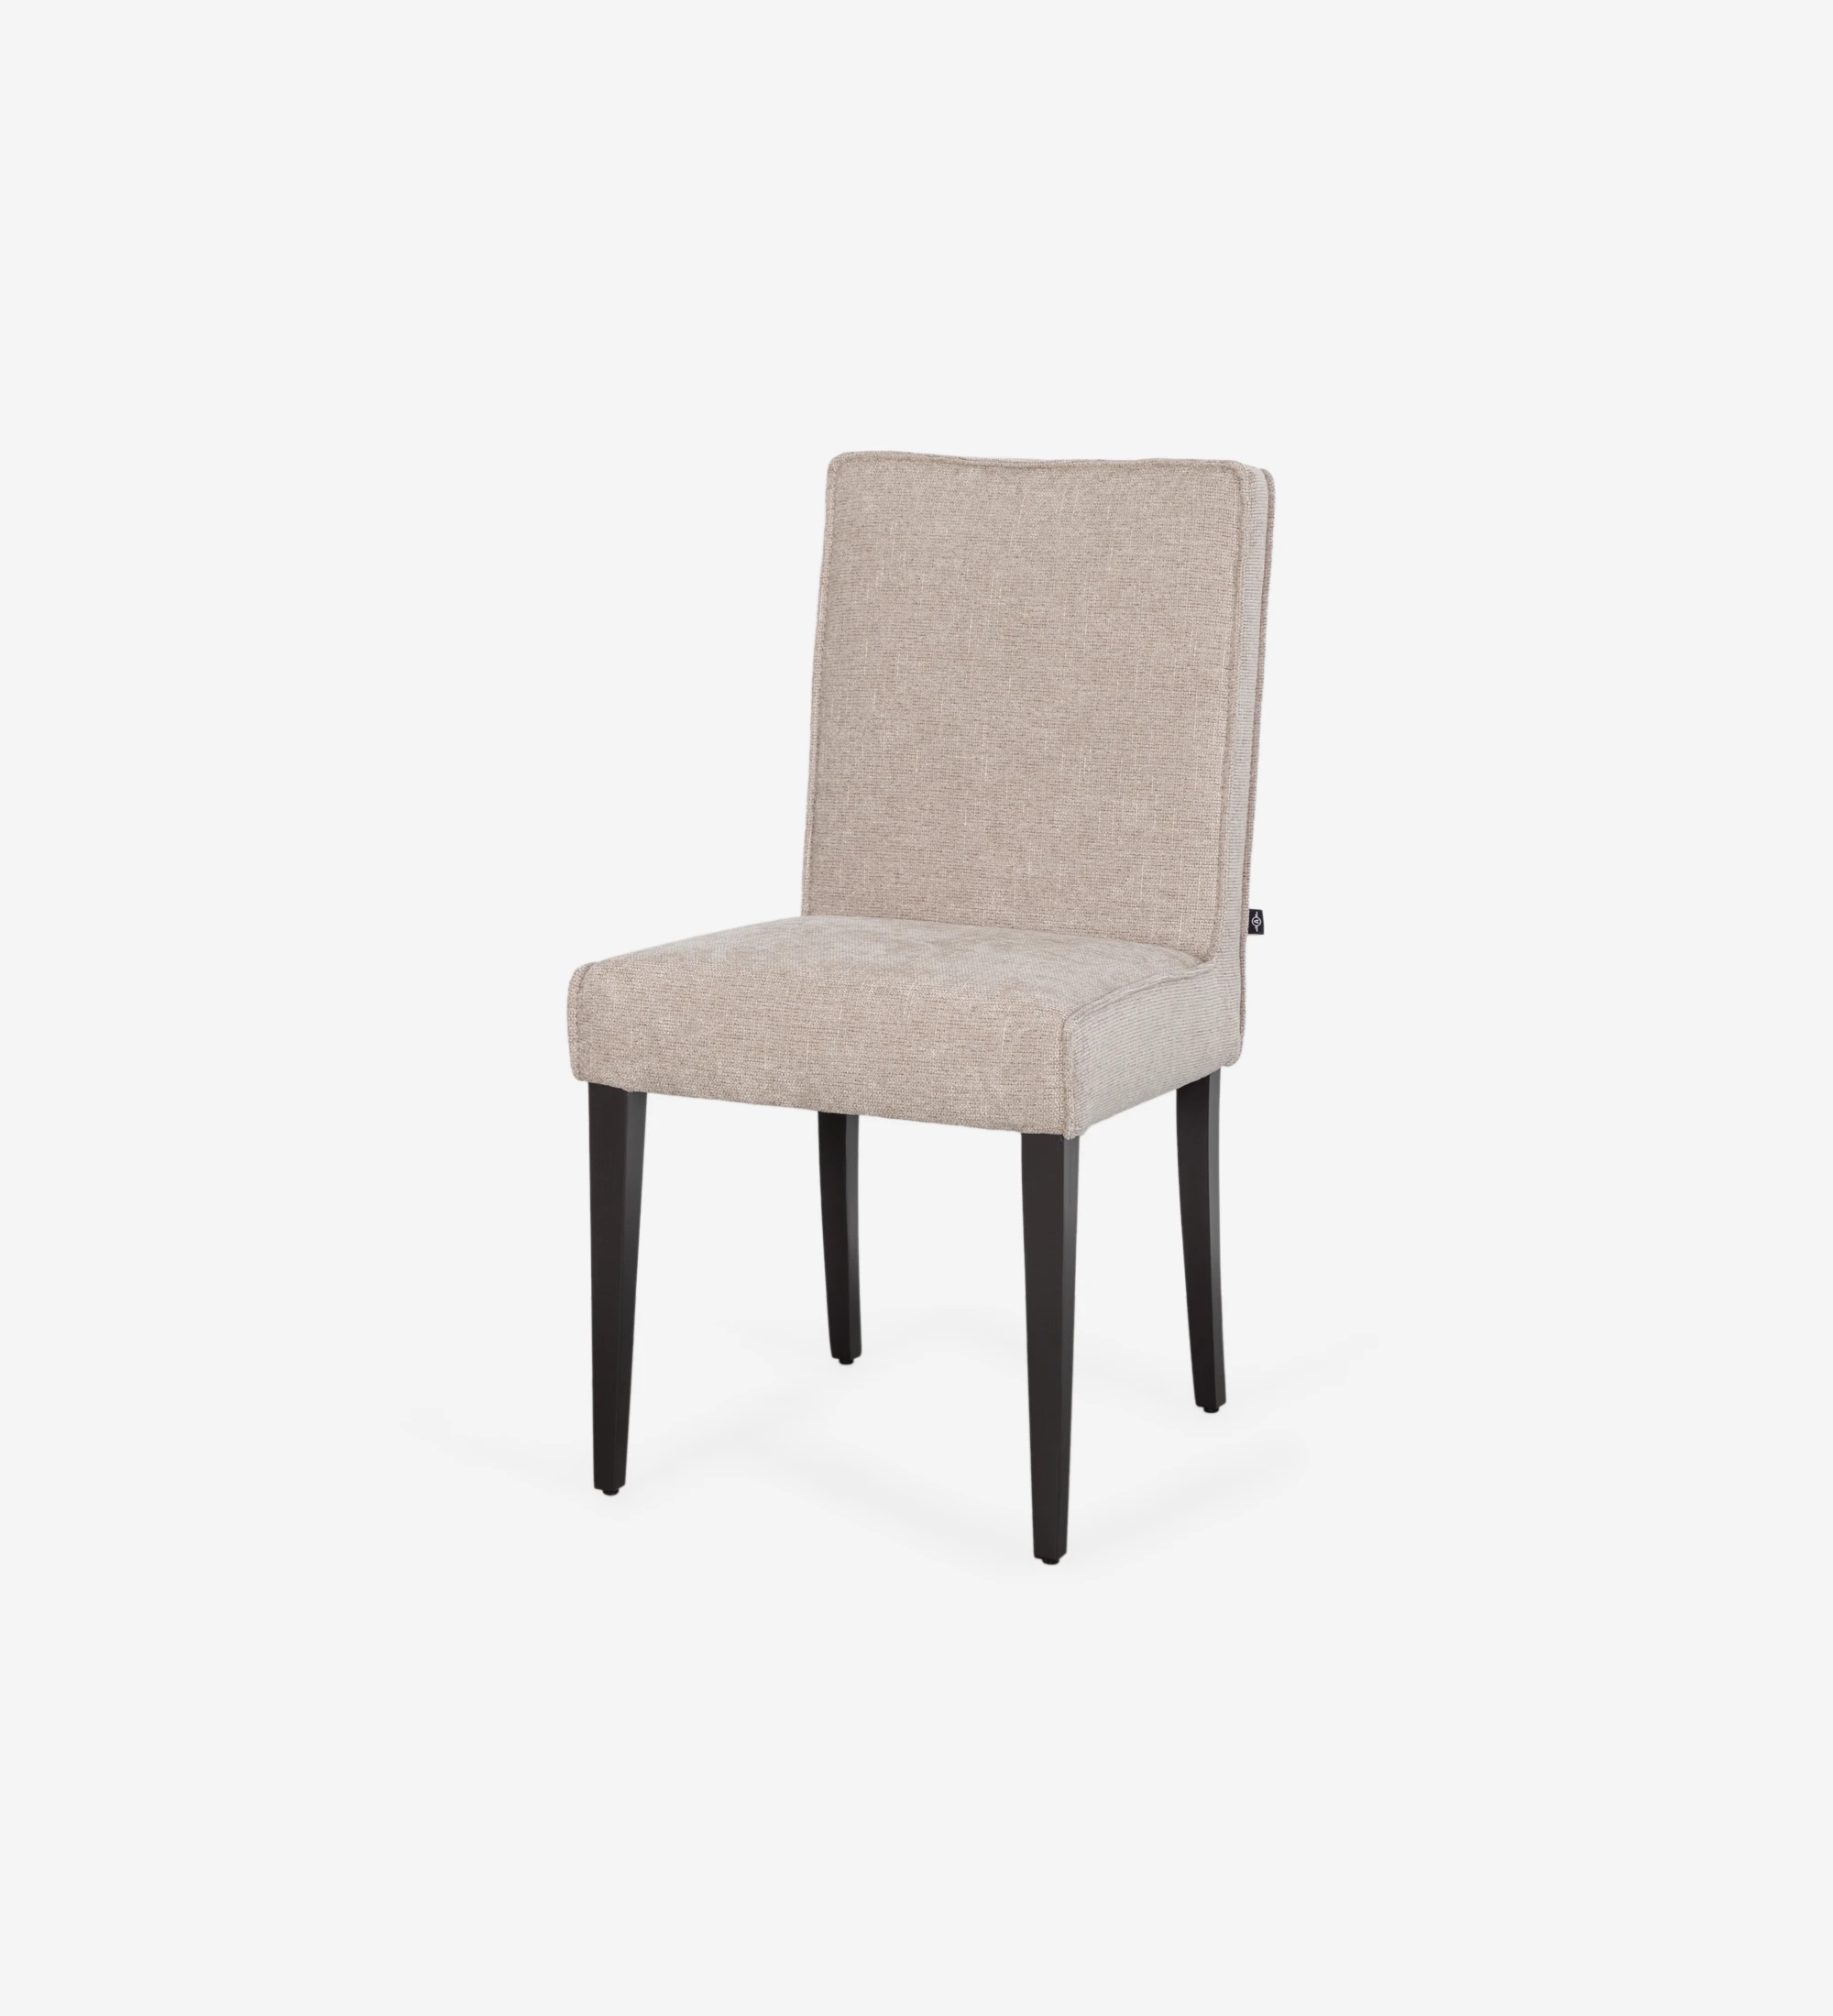 Rio chair upholstered in toffee fabric, black lacquered feet.